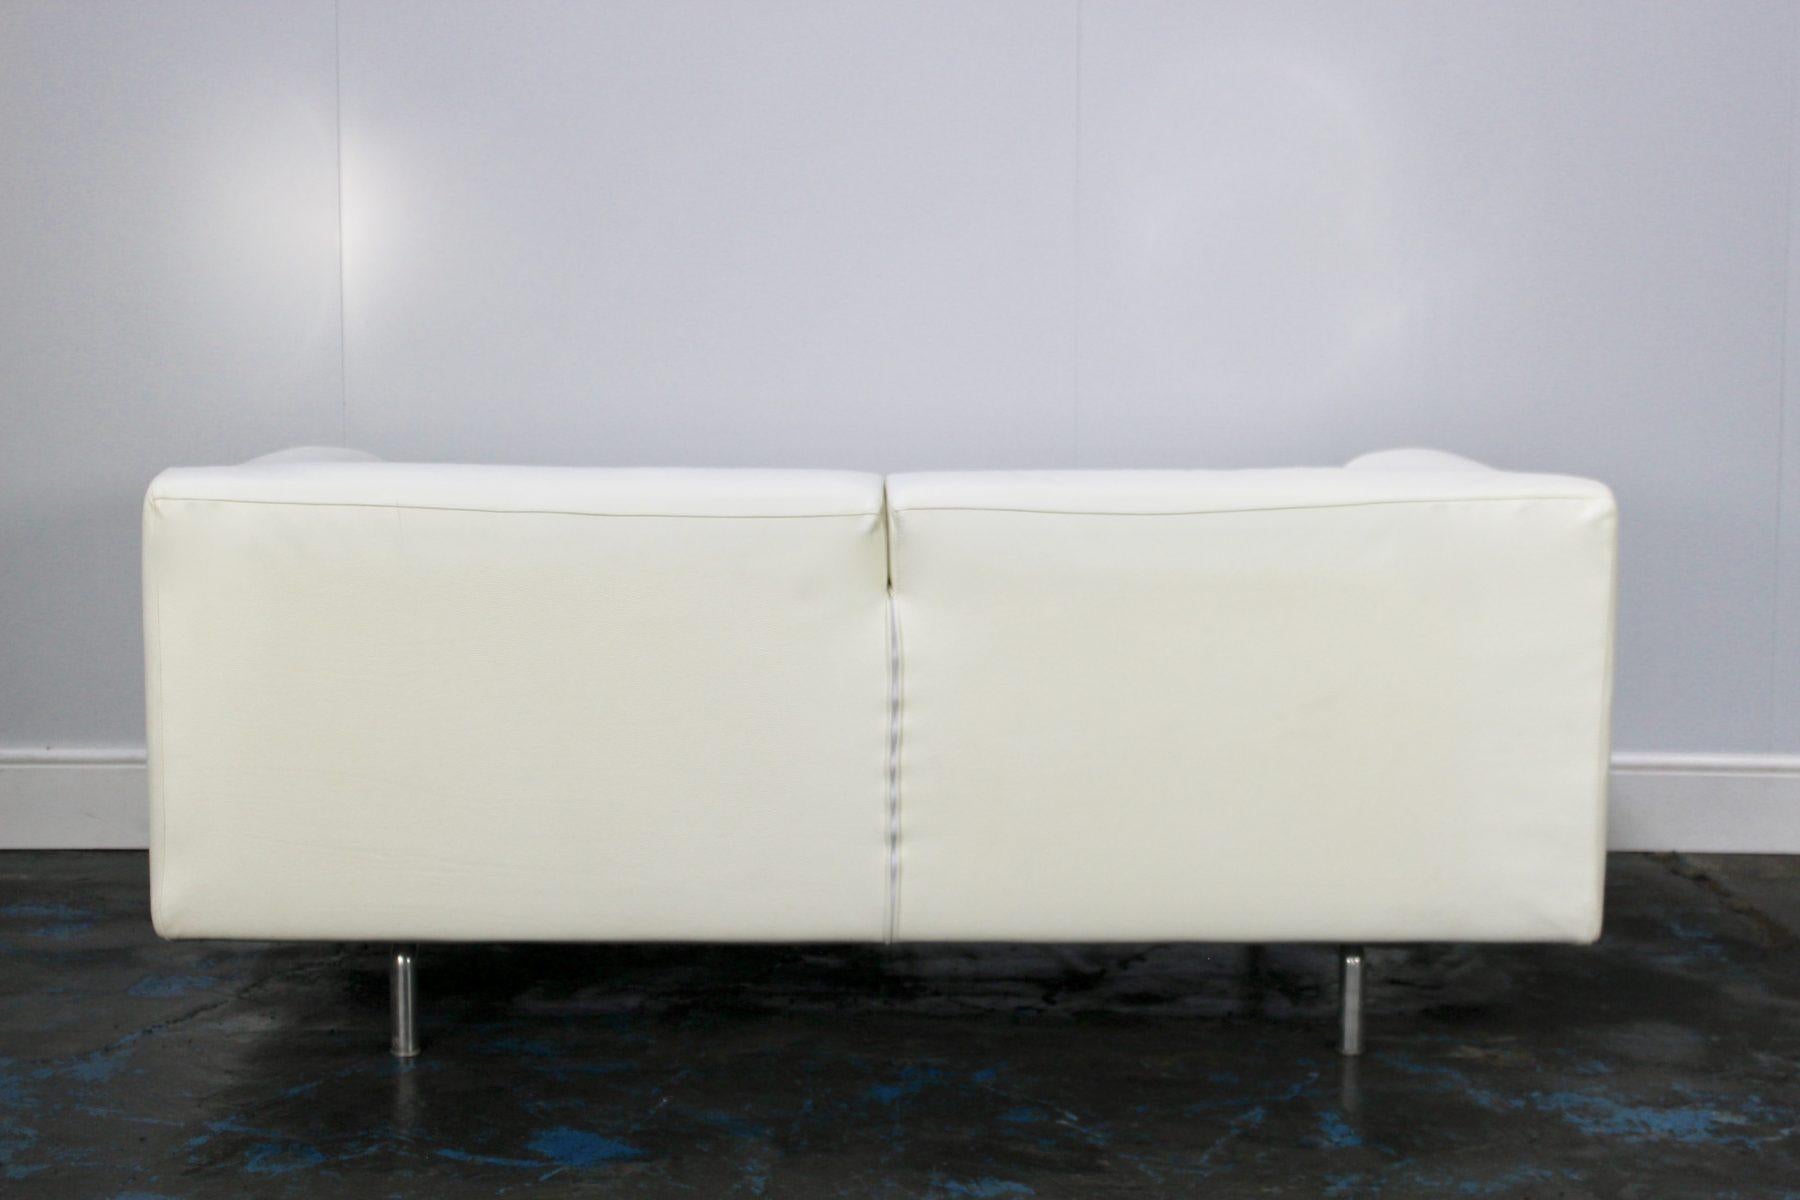 Cassina “250 Met” Large 2-Seat Sofa in Chalk White Leather For Sale 2